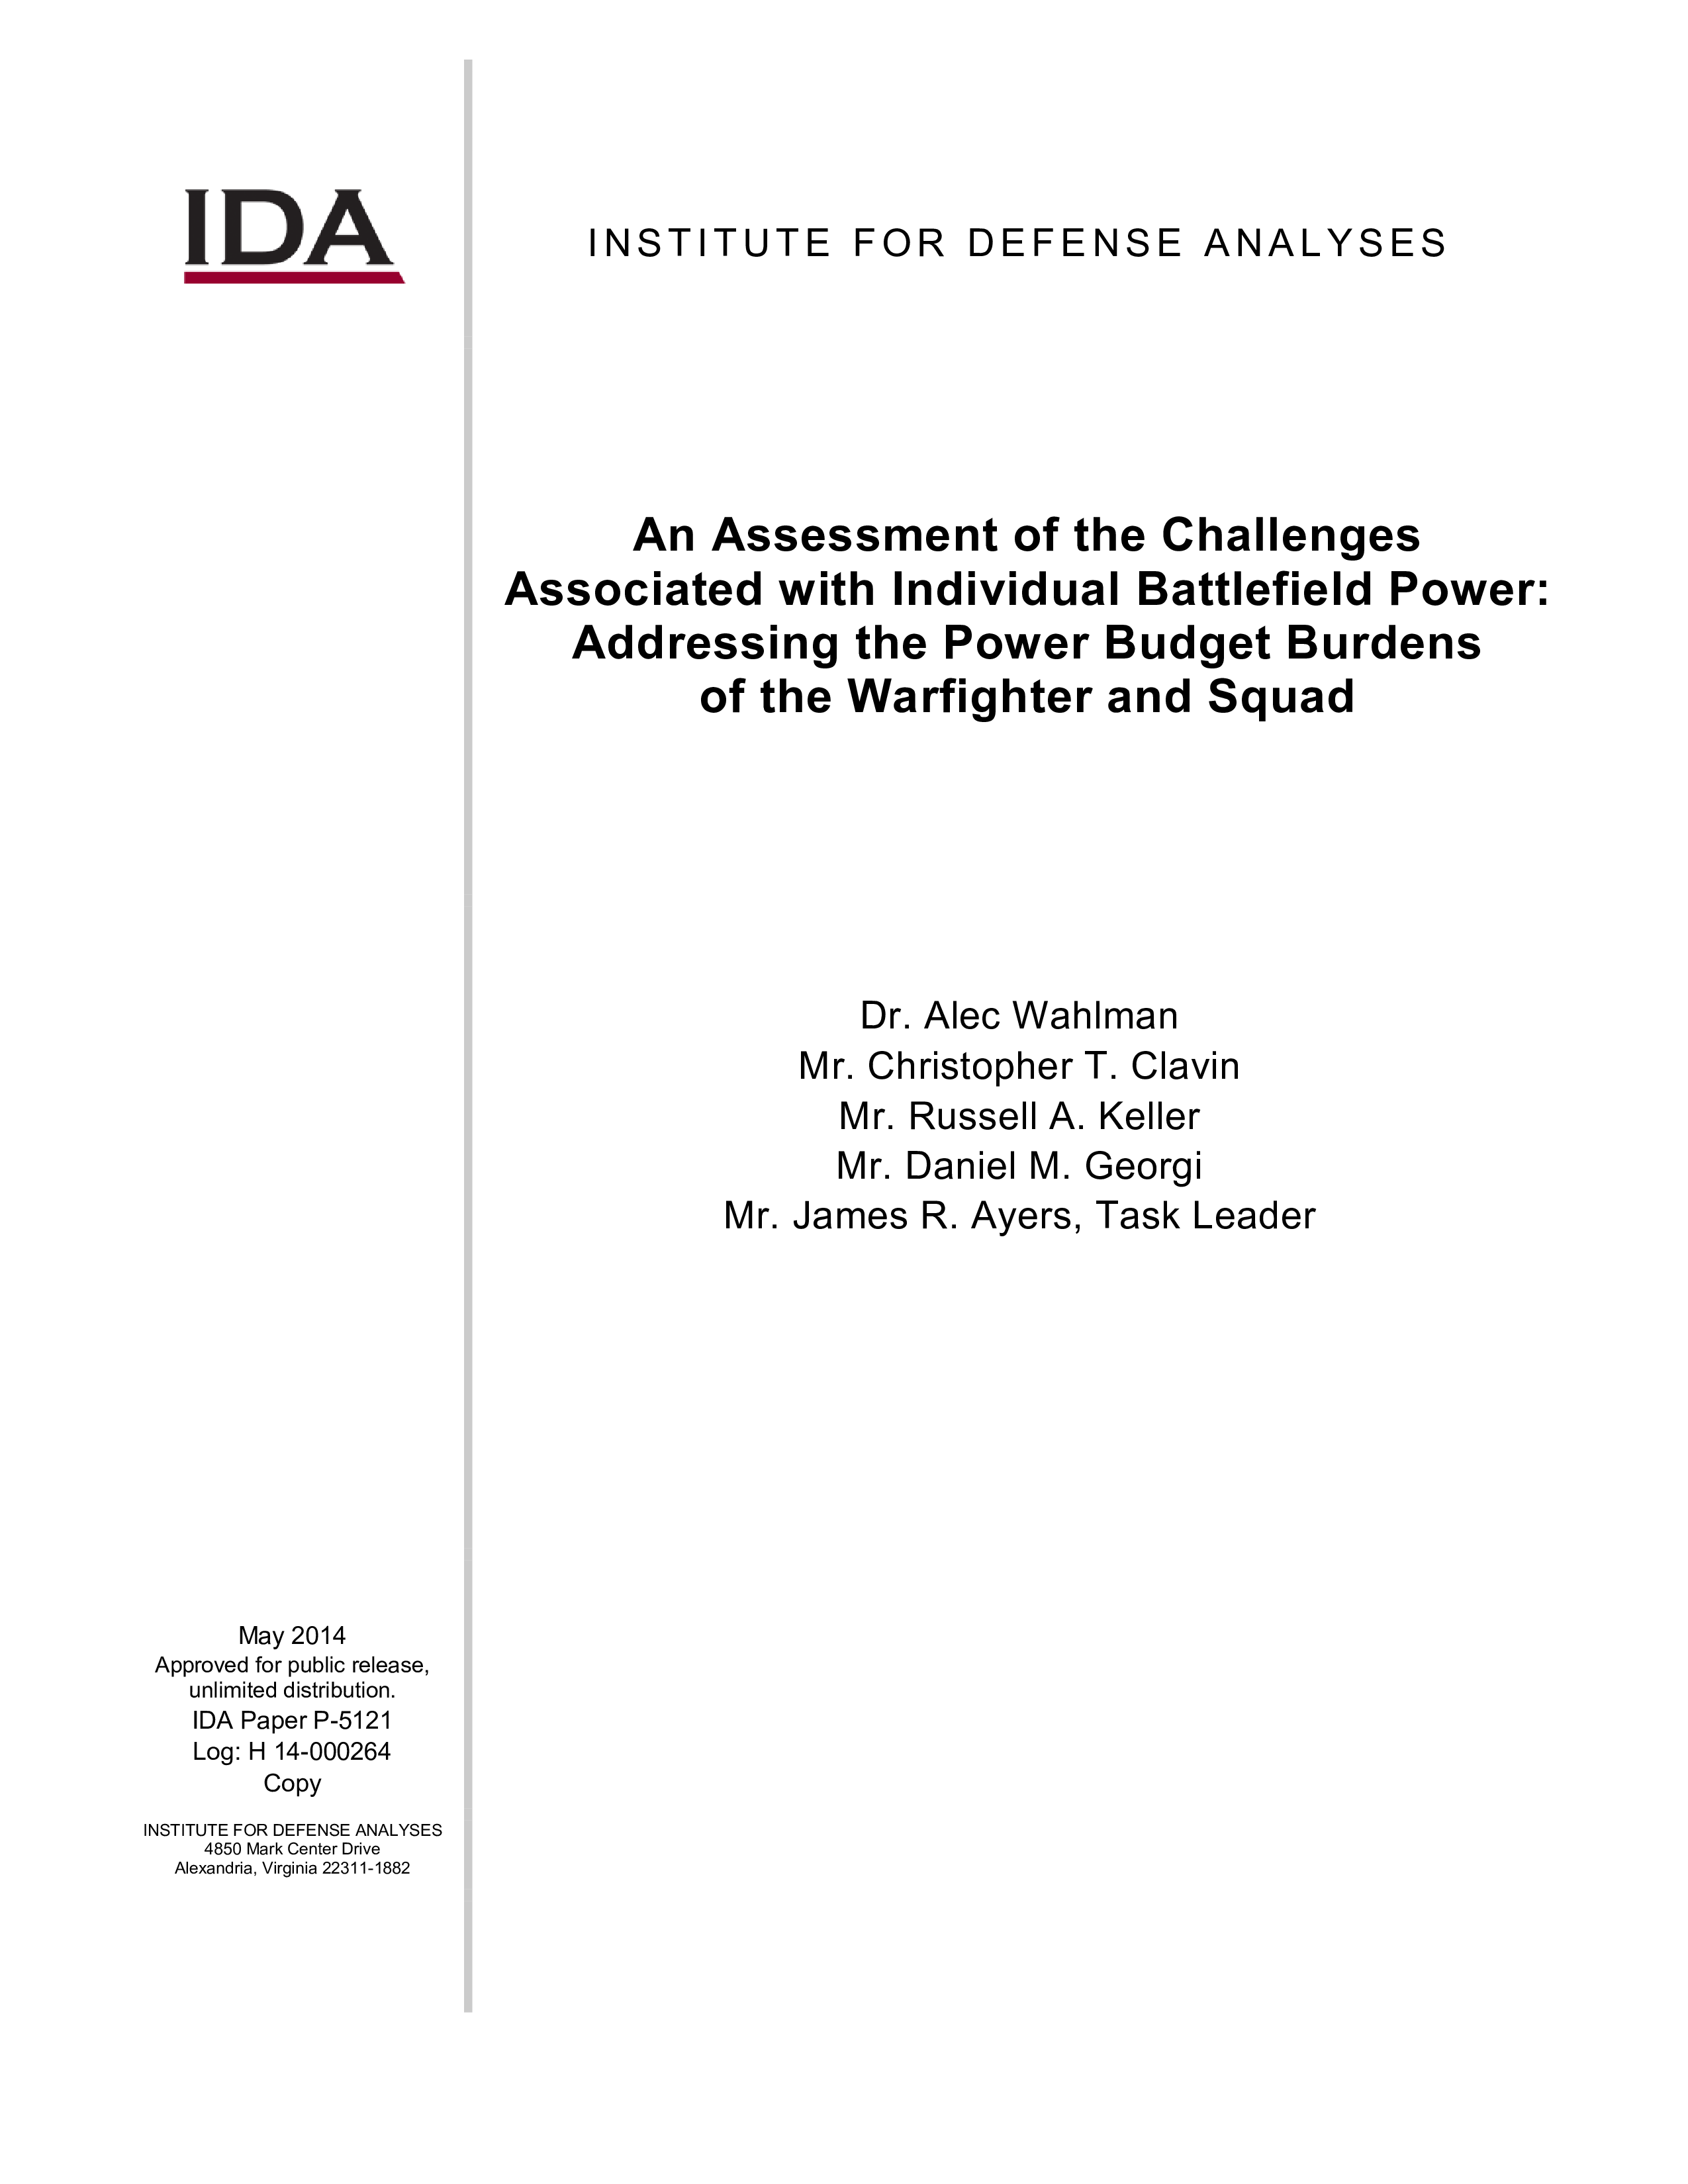 An Assessment of the Challenges Associated with Individual Battlefield Power: Addressing the Power Budget Burdens of the Warfighter and Squad